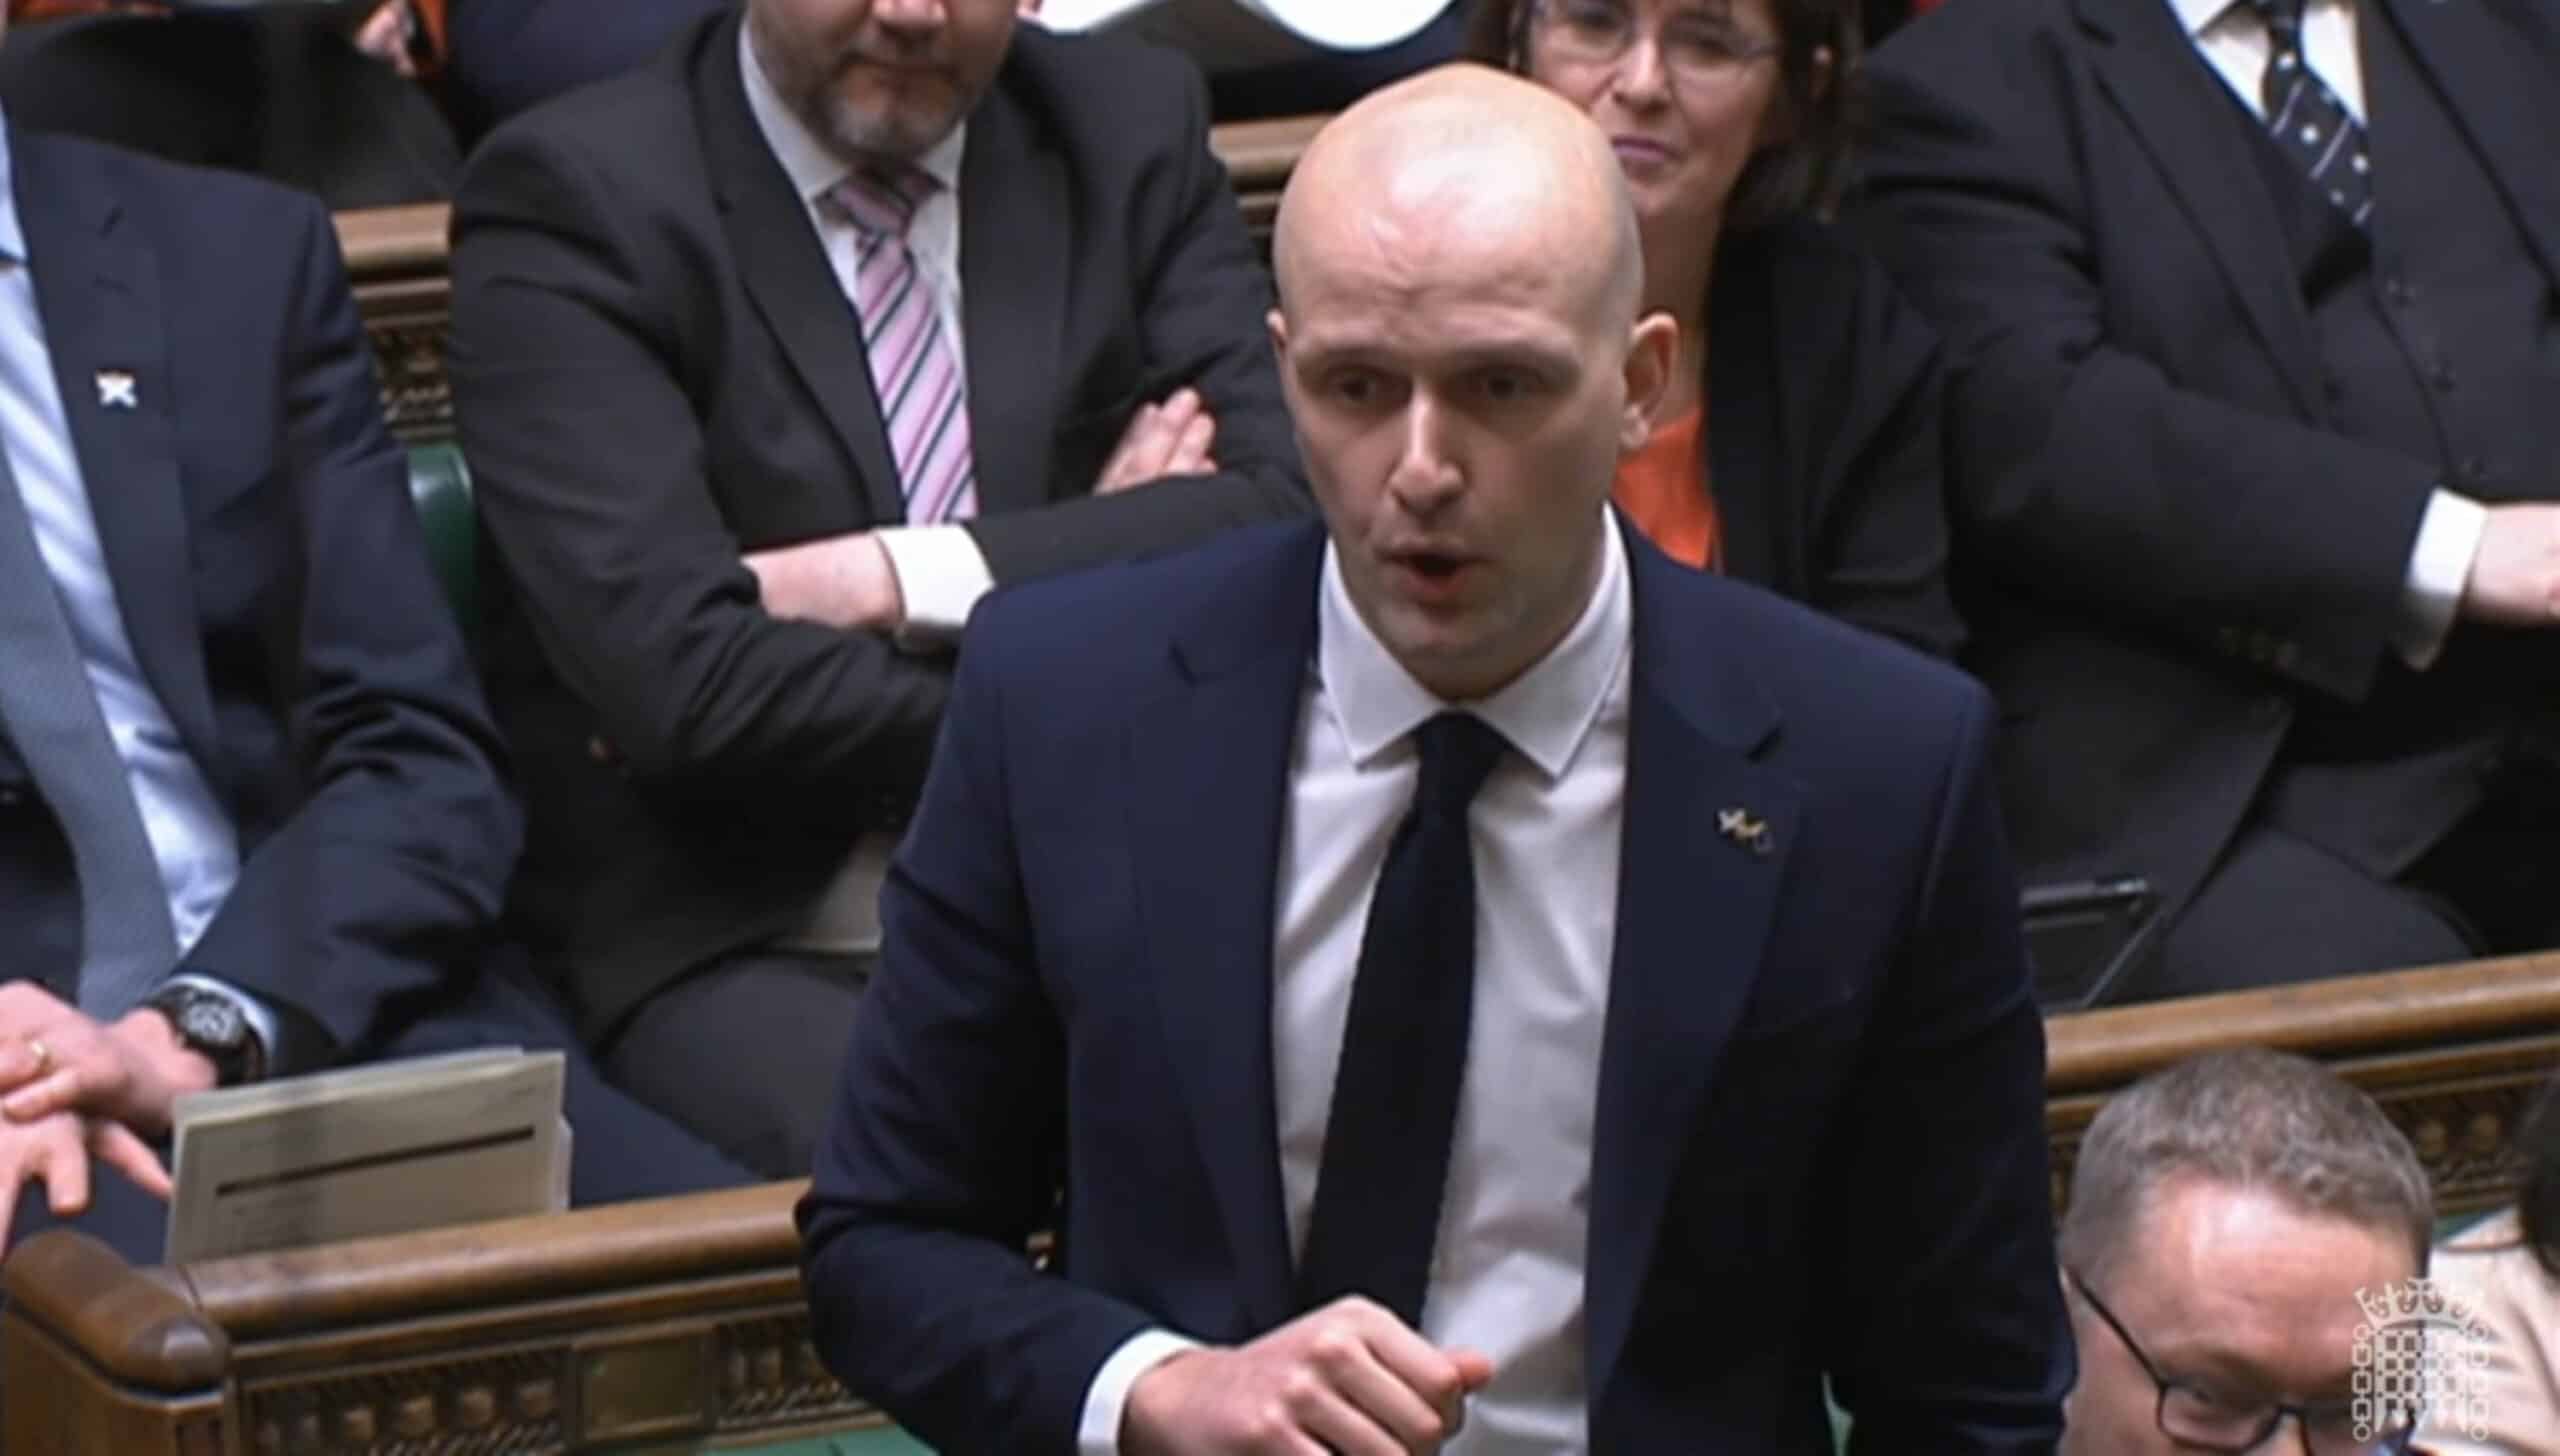 SNP leader accuses PM of taking inspiration from ‘Nigel Farage or Enoch Powell’